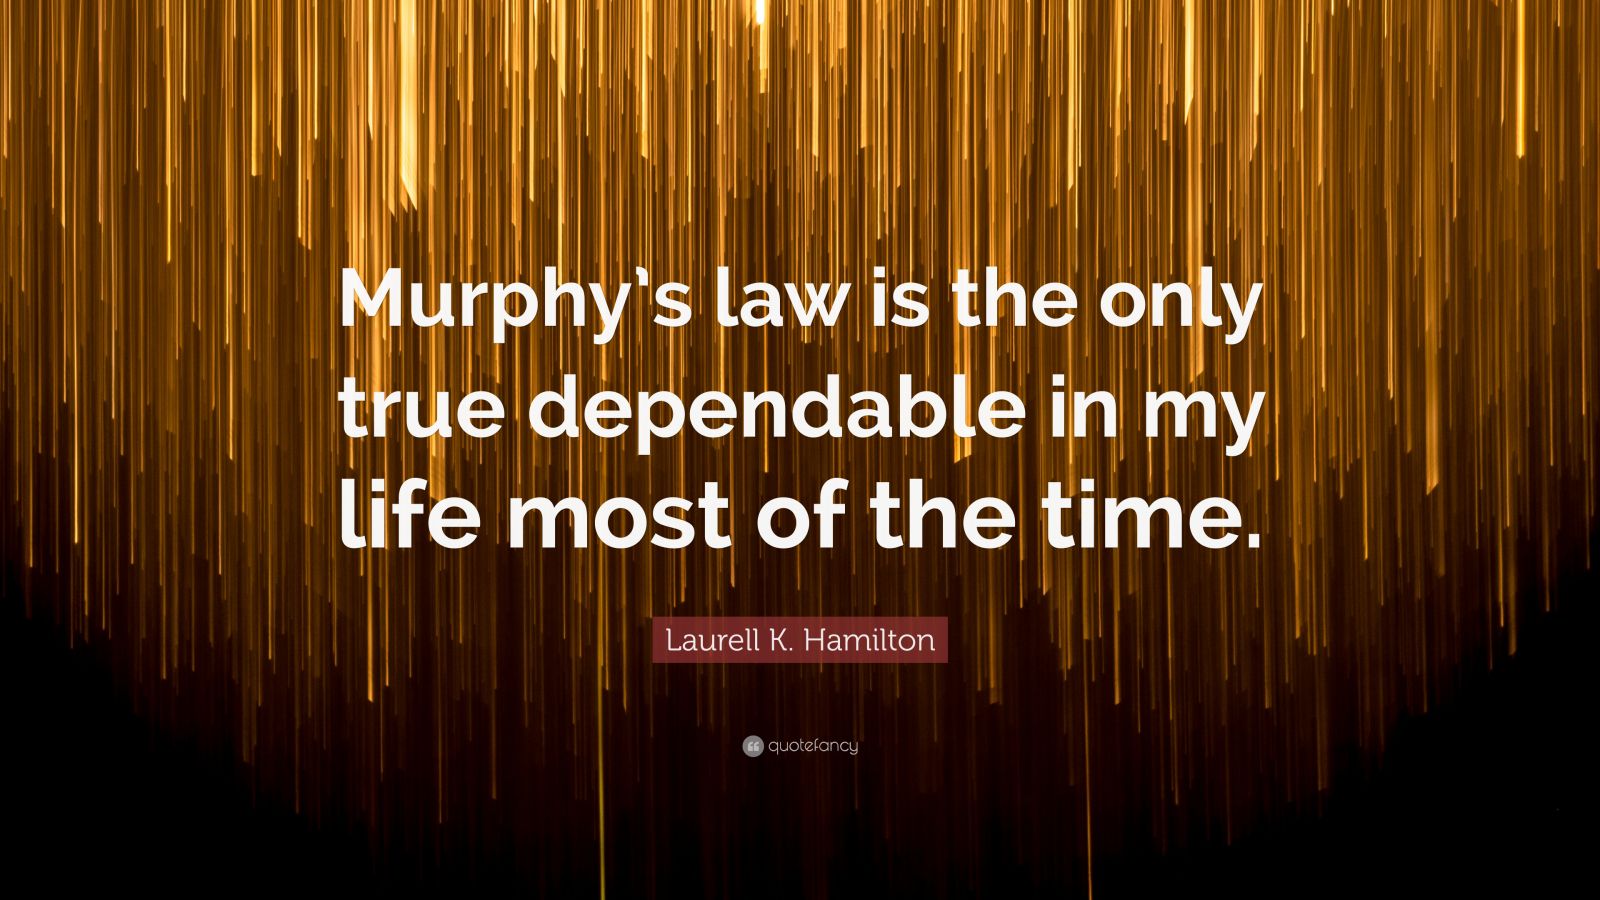 Laurell K Hamilton Quote Murphy S Law Is The Only True Dependable In My Life Most Of The Time